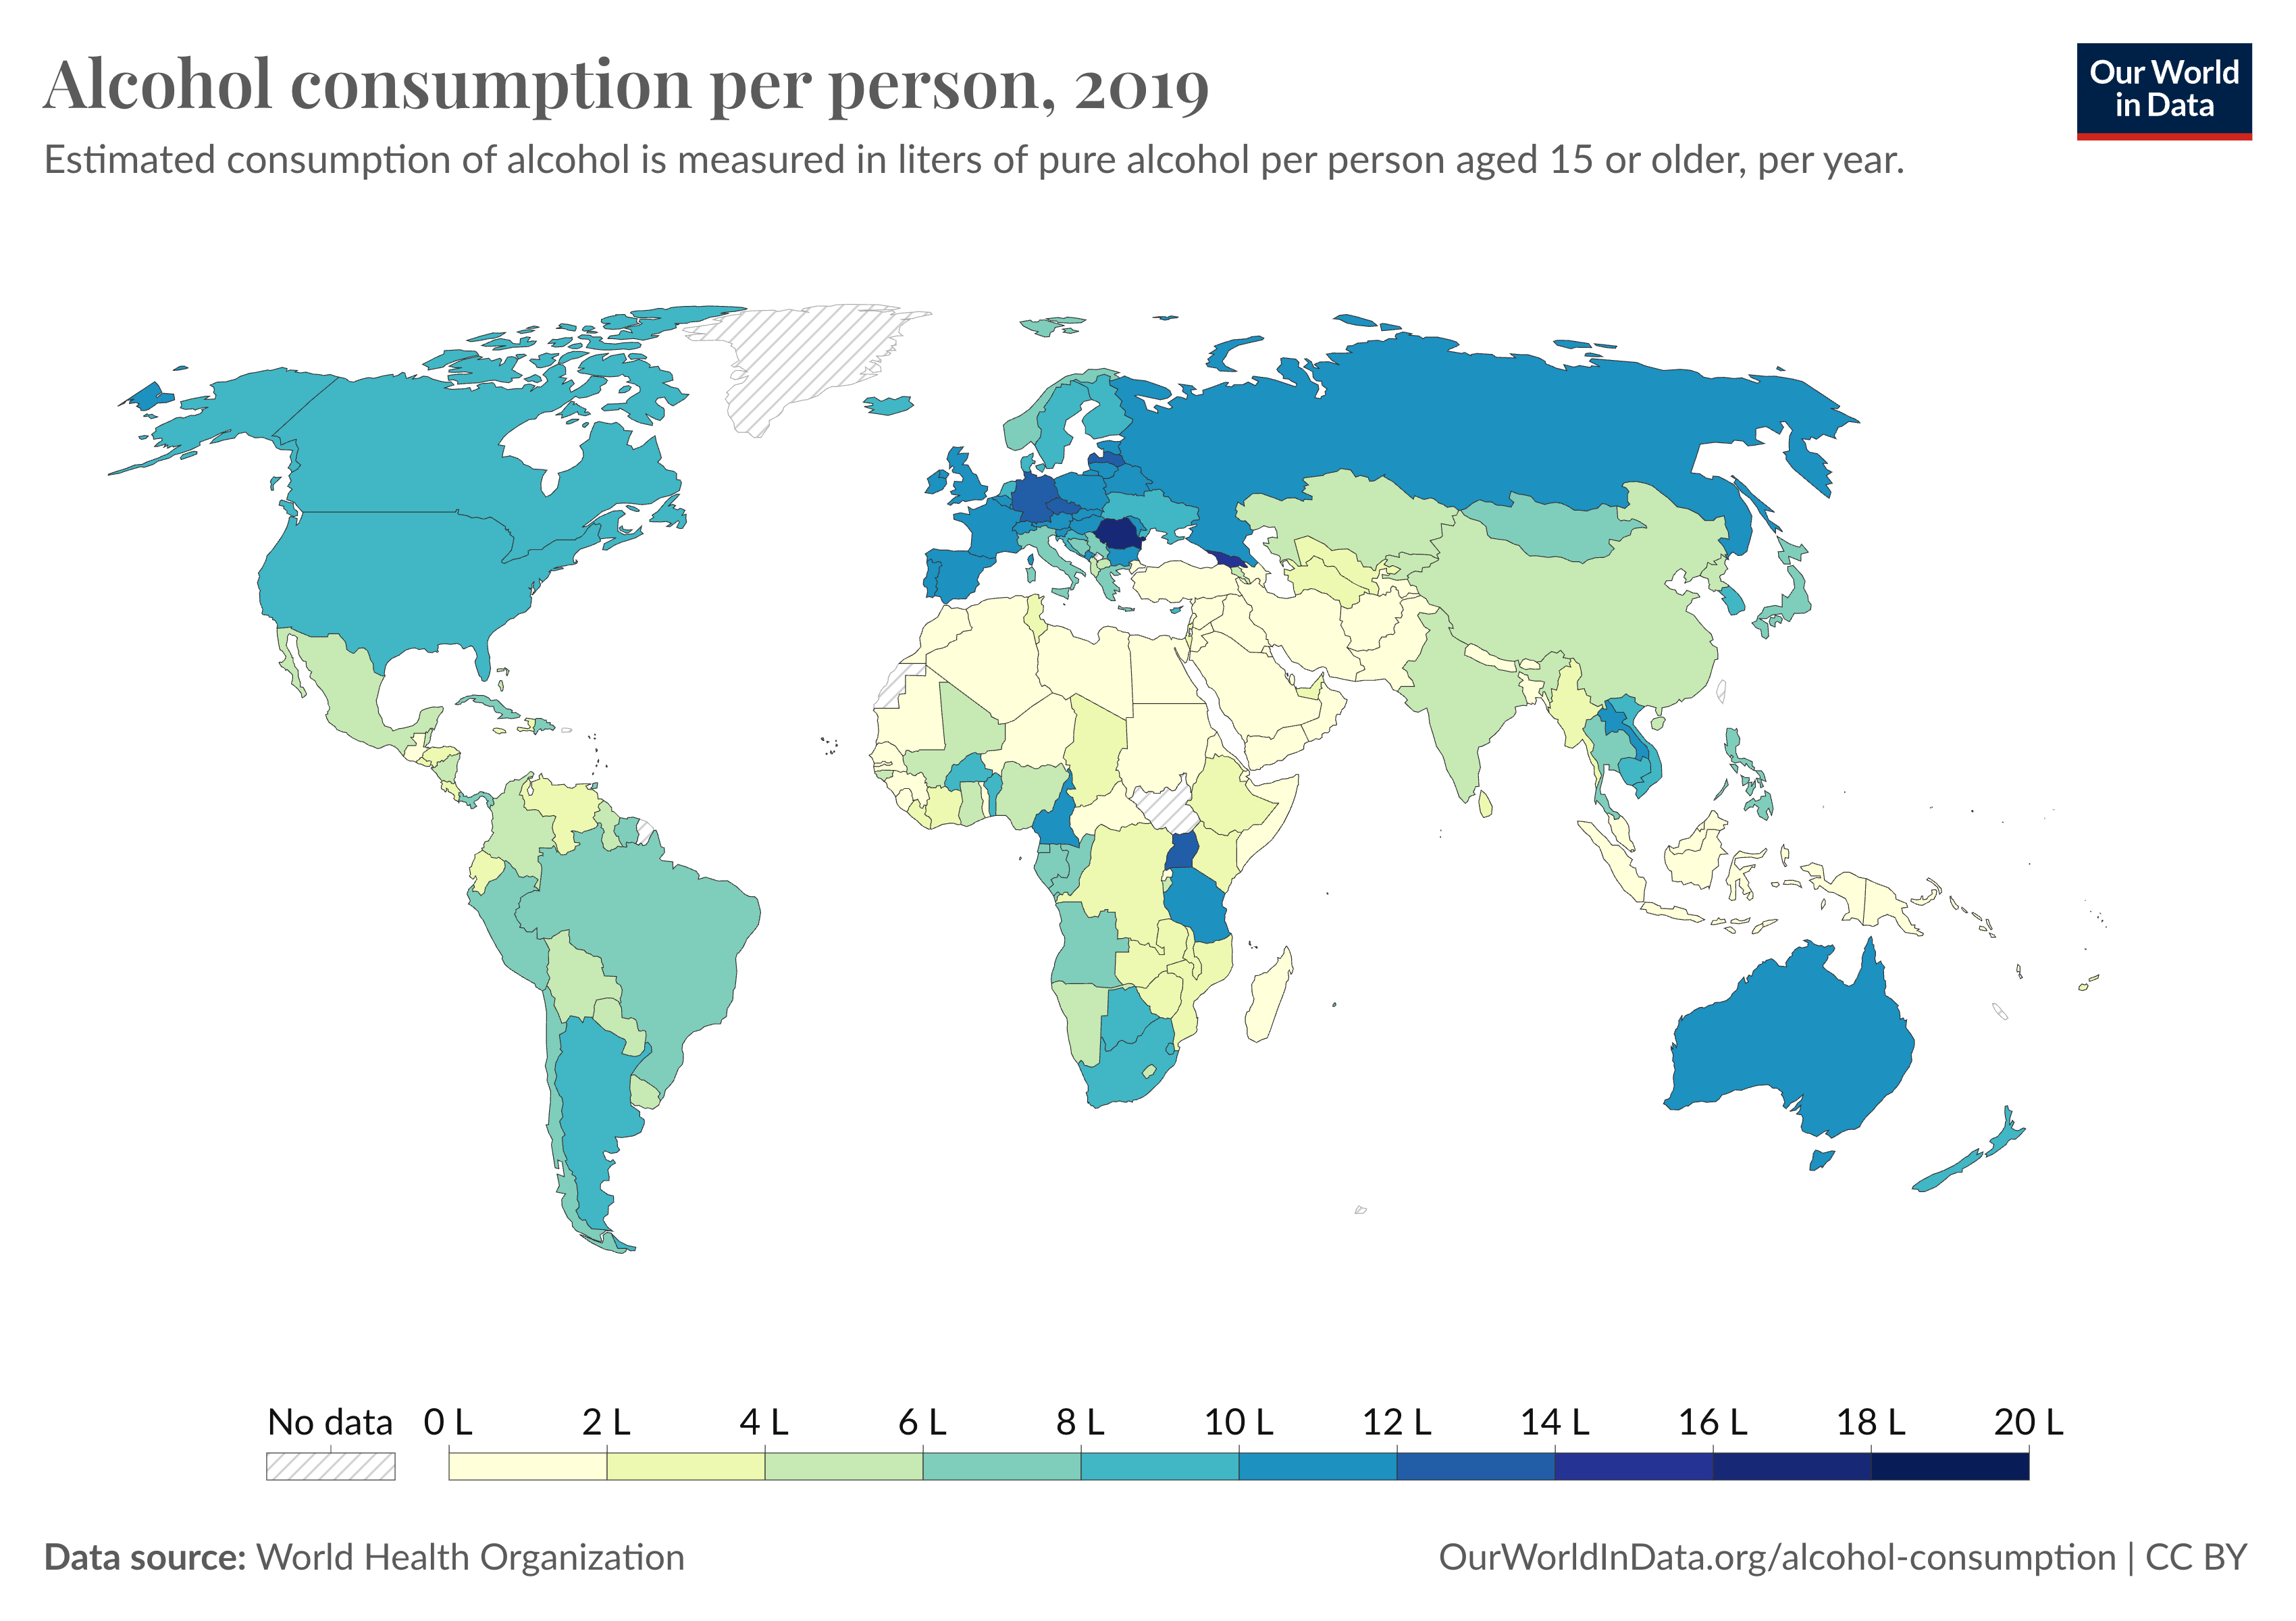 world map showing alcohol consumption per person for 2019, version for desktop